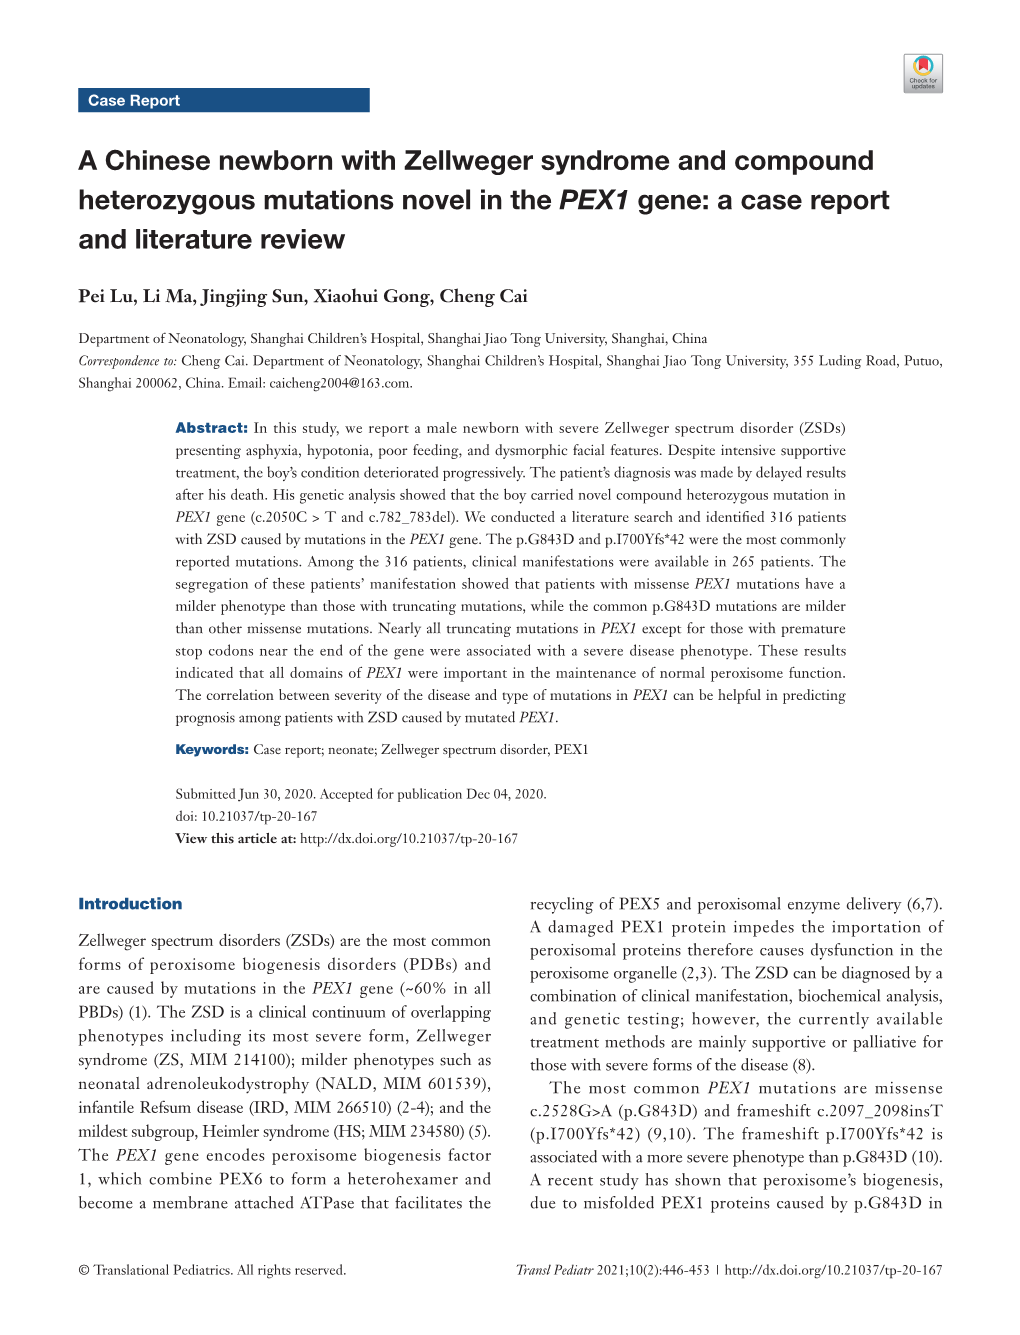 A Chinese Newborn with Zellweger Syndrome and Compound Heterozygous Mutations Novel in the PEX1 Gene: a Case Report and Literature Review